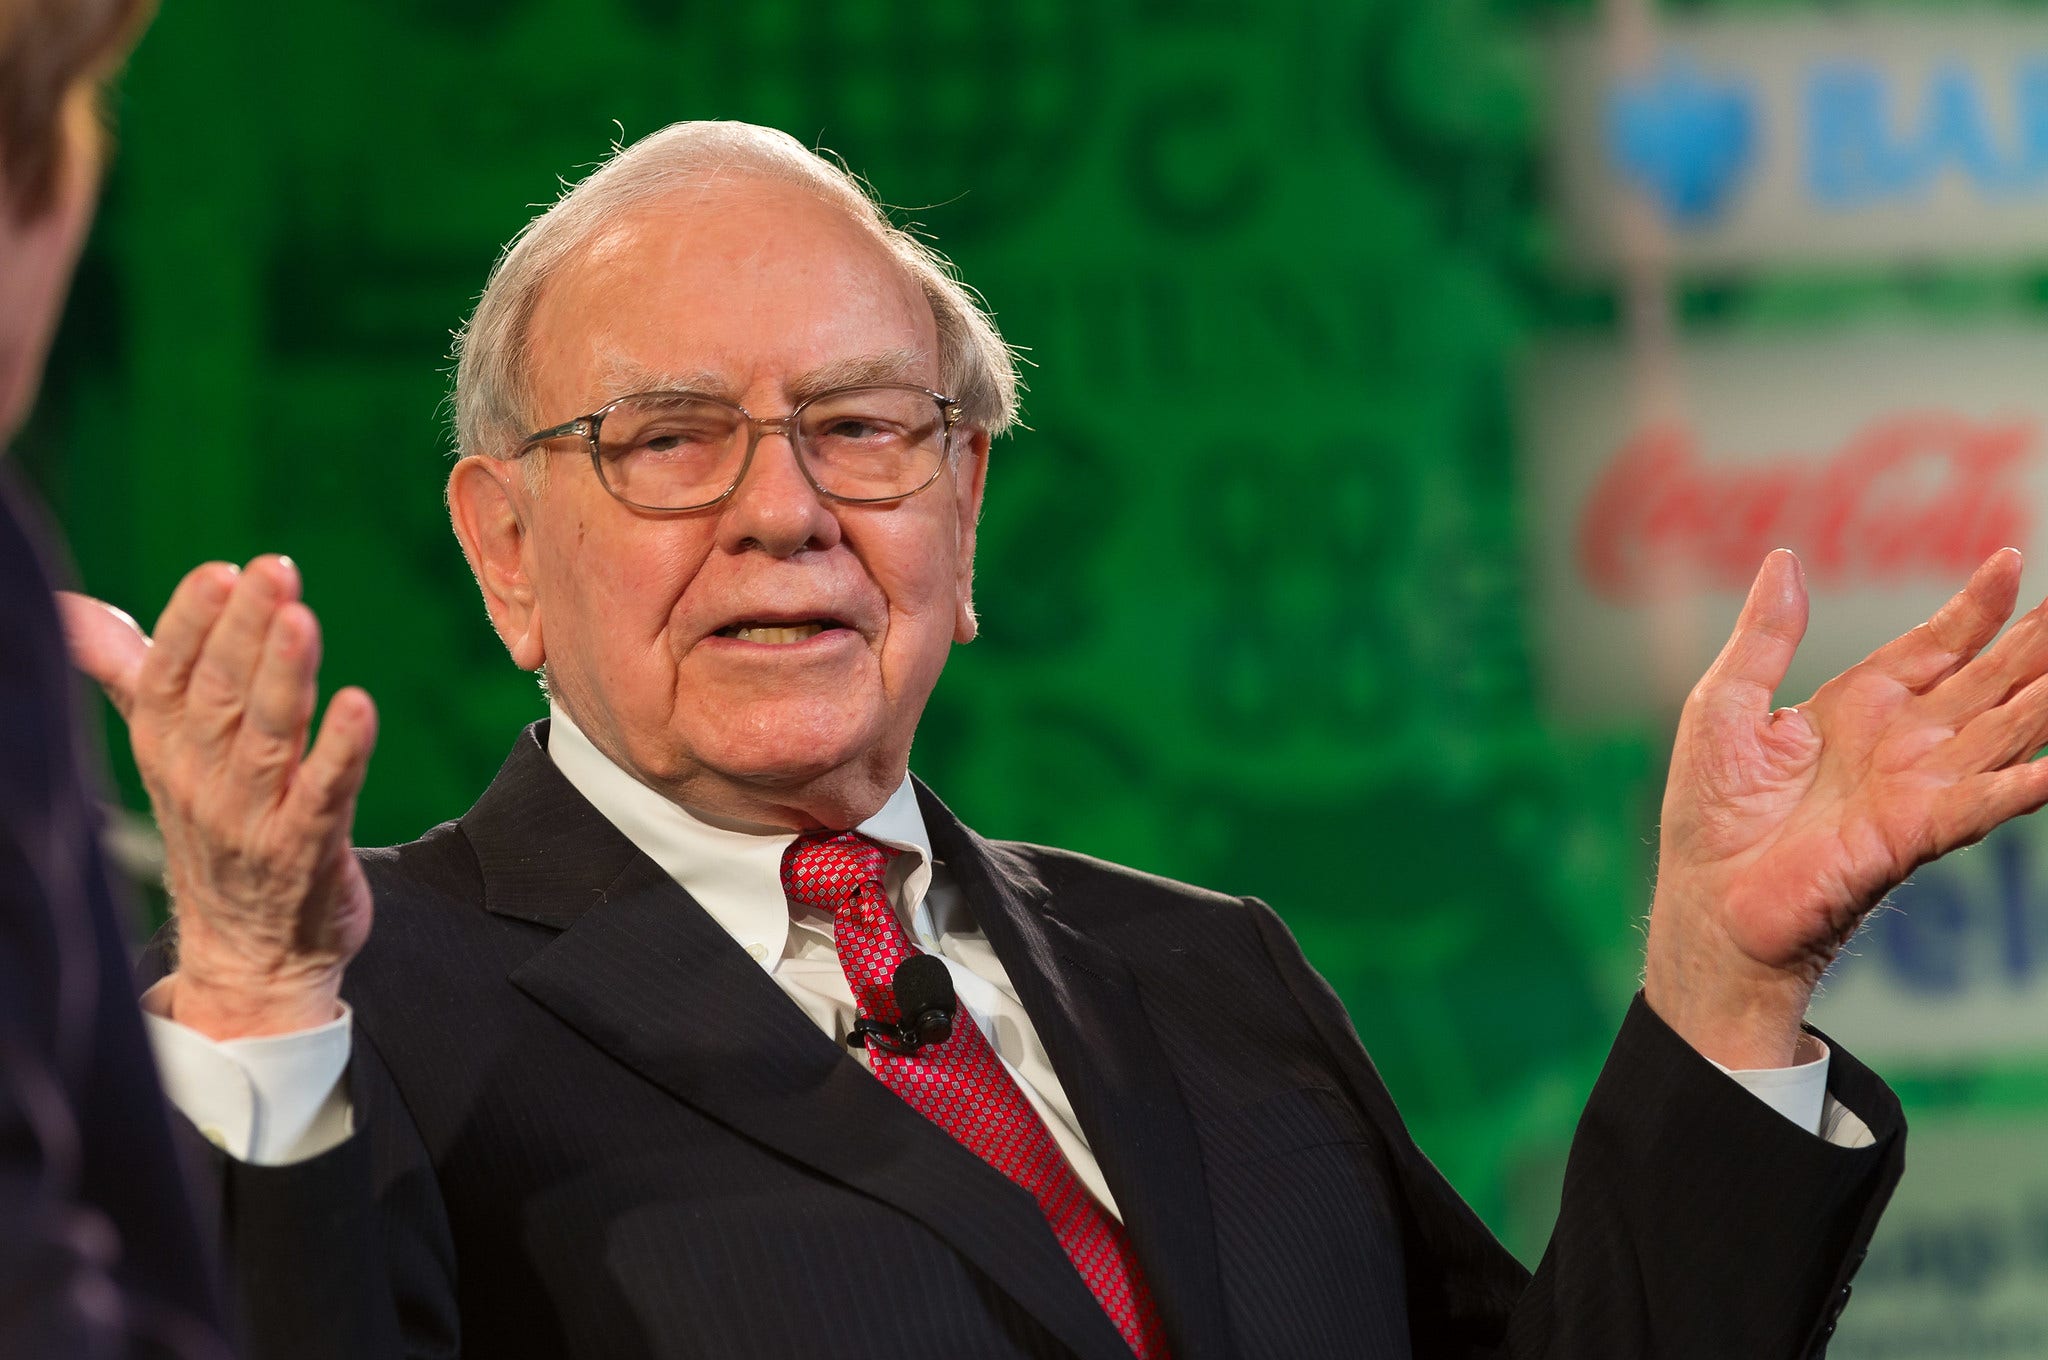 Warren Buffett Has Held This Stock for Over 34 Years — Why He Will Never Sell